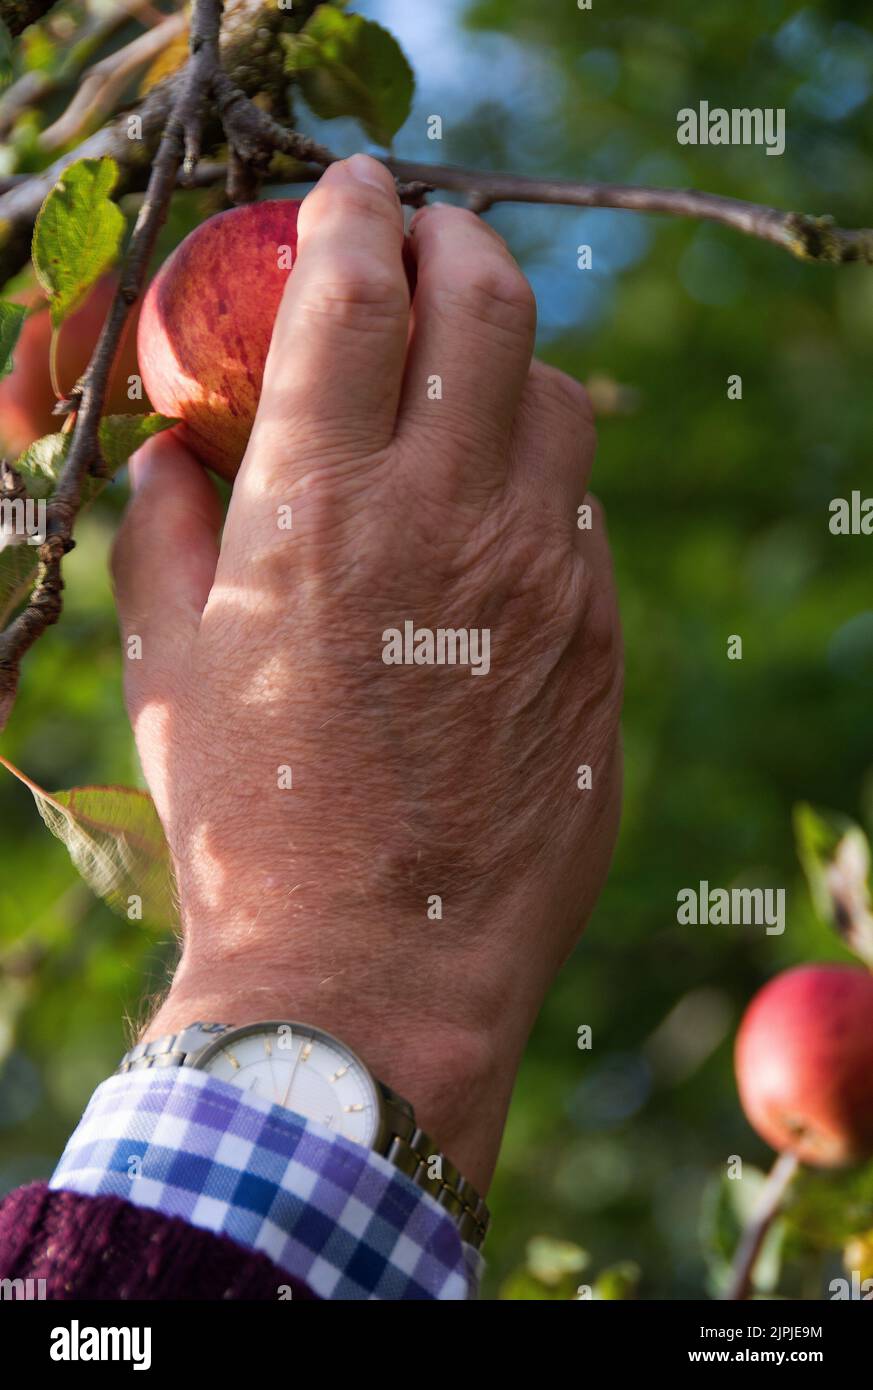 Picking a Cox's Orange Pippin apple in an old orchard Stock Photo